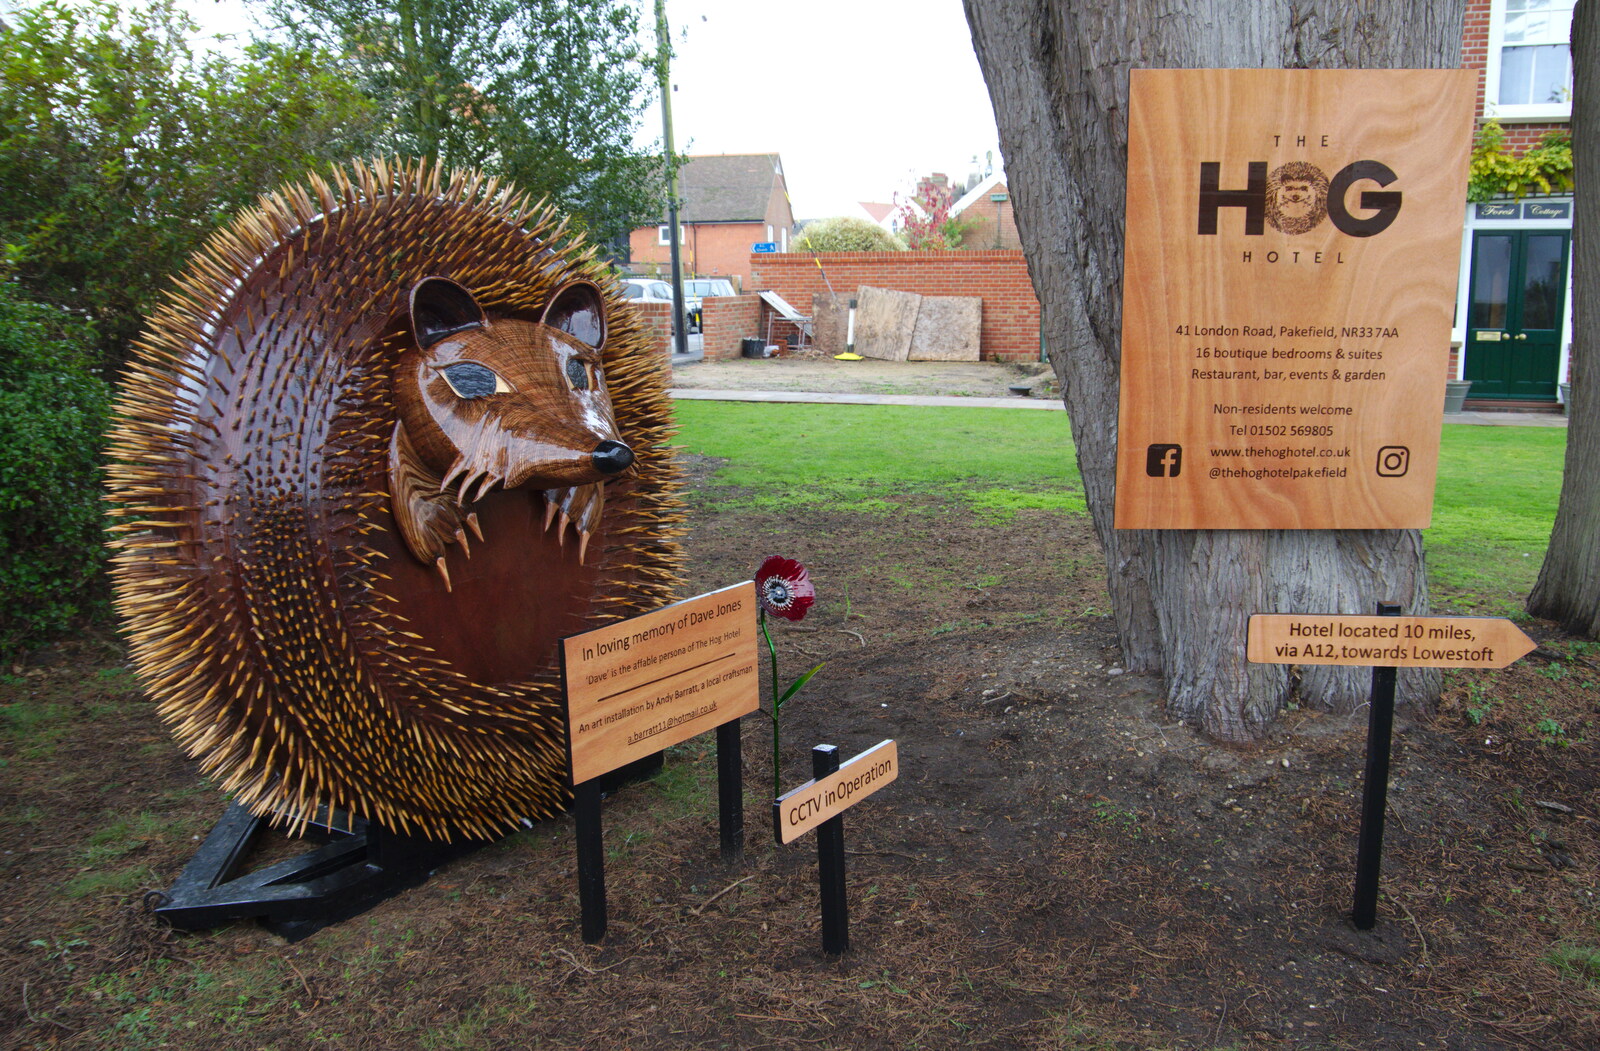 A cool hedgehog sculpture, and a Hog Hotel advert from A Night at the Crown Hotel, Southwold, Suffolk - 8th November 2019